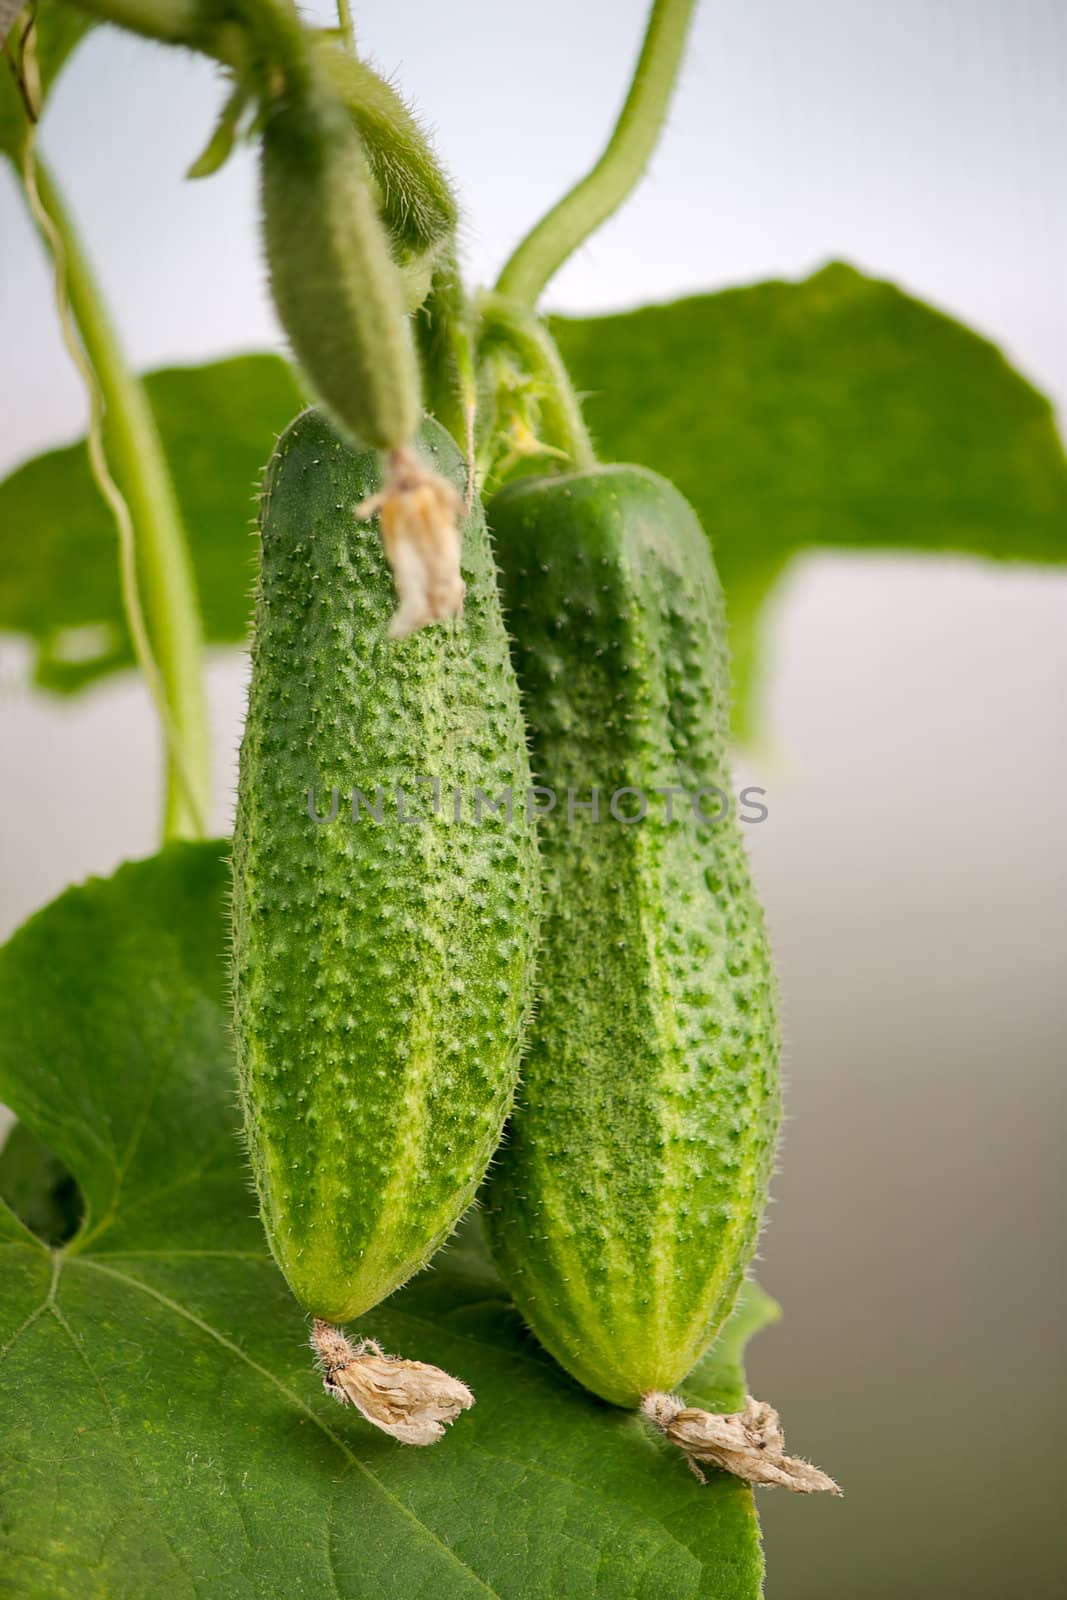 Two cucumbers  close up on  branch against  background of leaves.